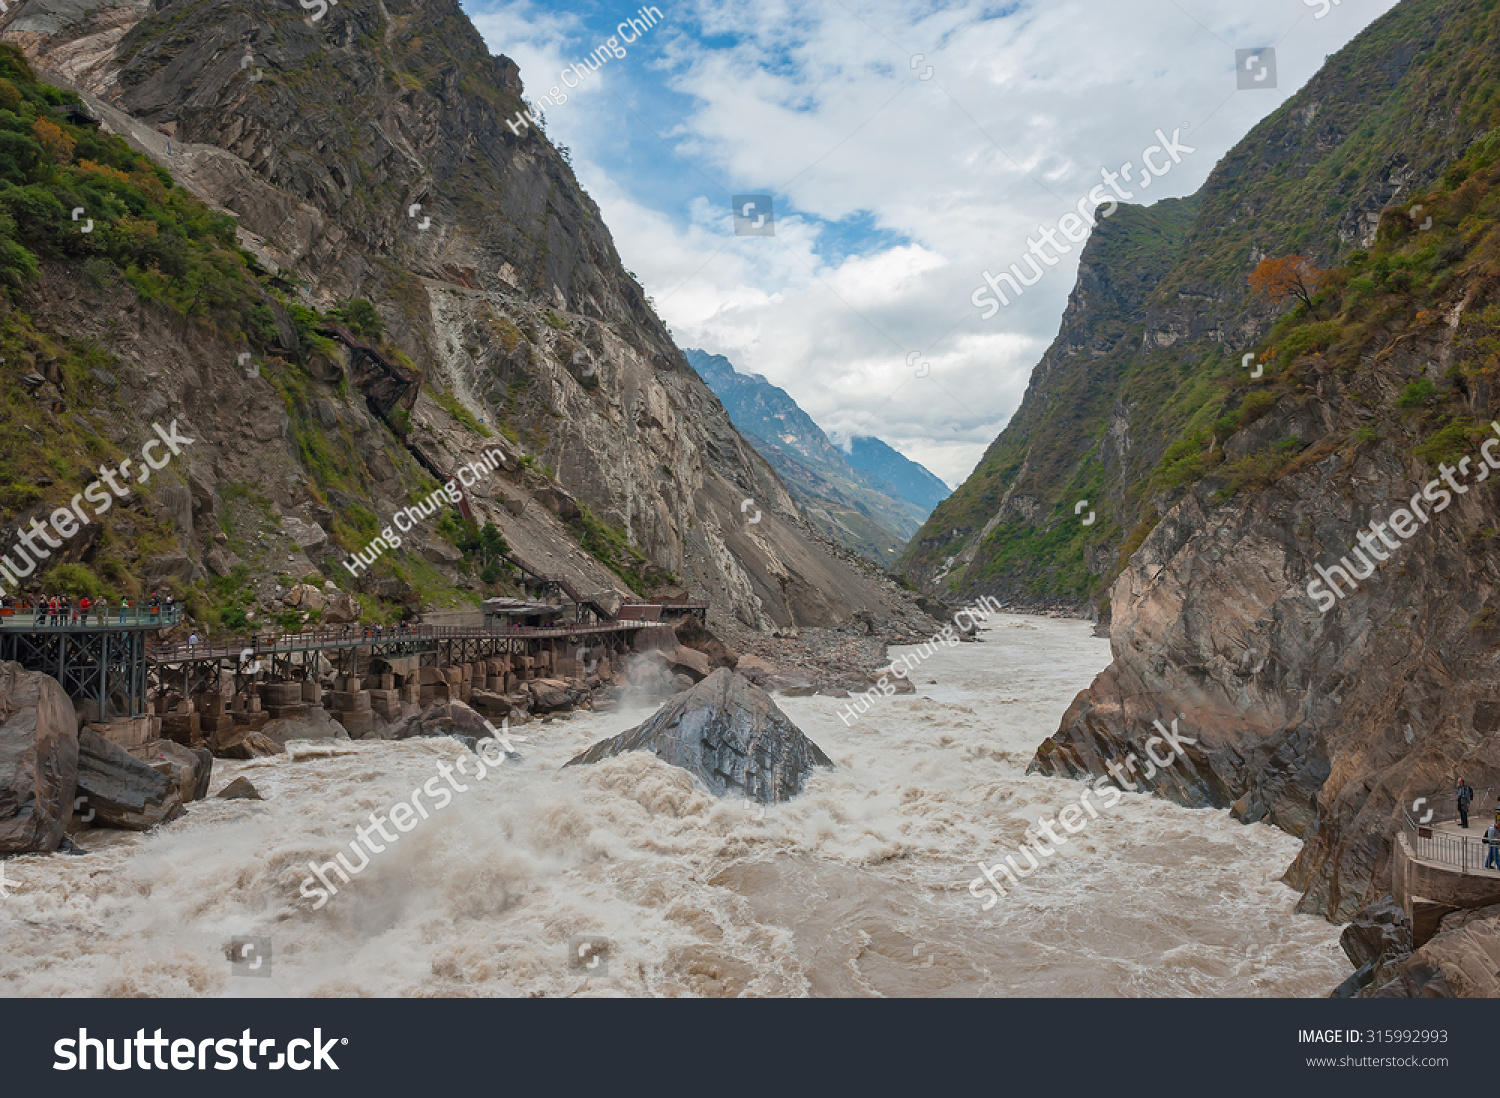 Tiger leaping gorge in China ( world's deepest gorge ) #315992993